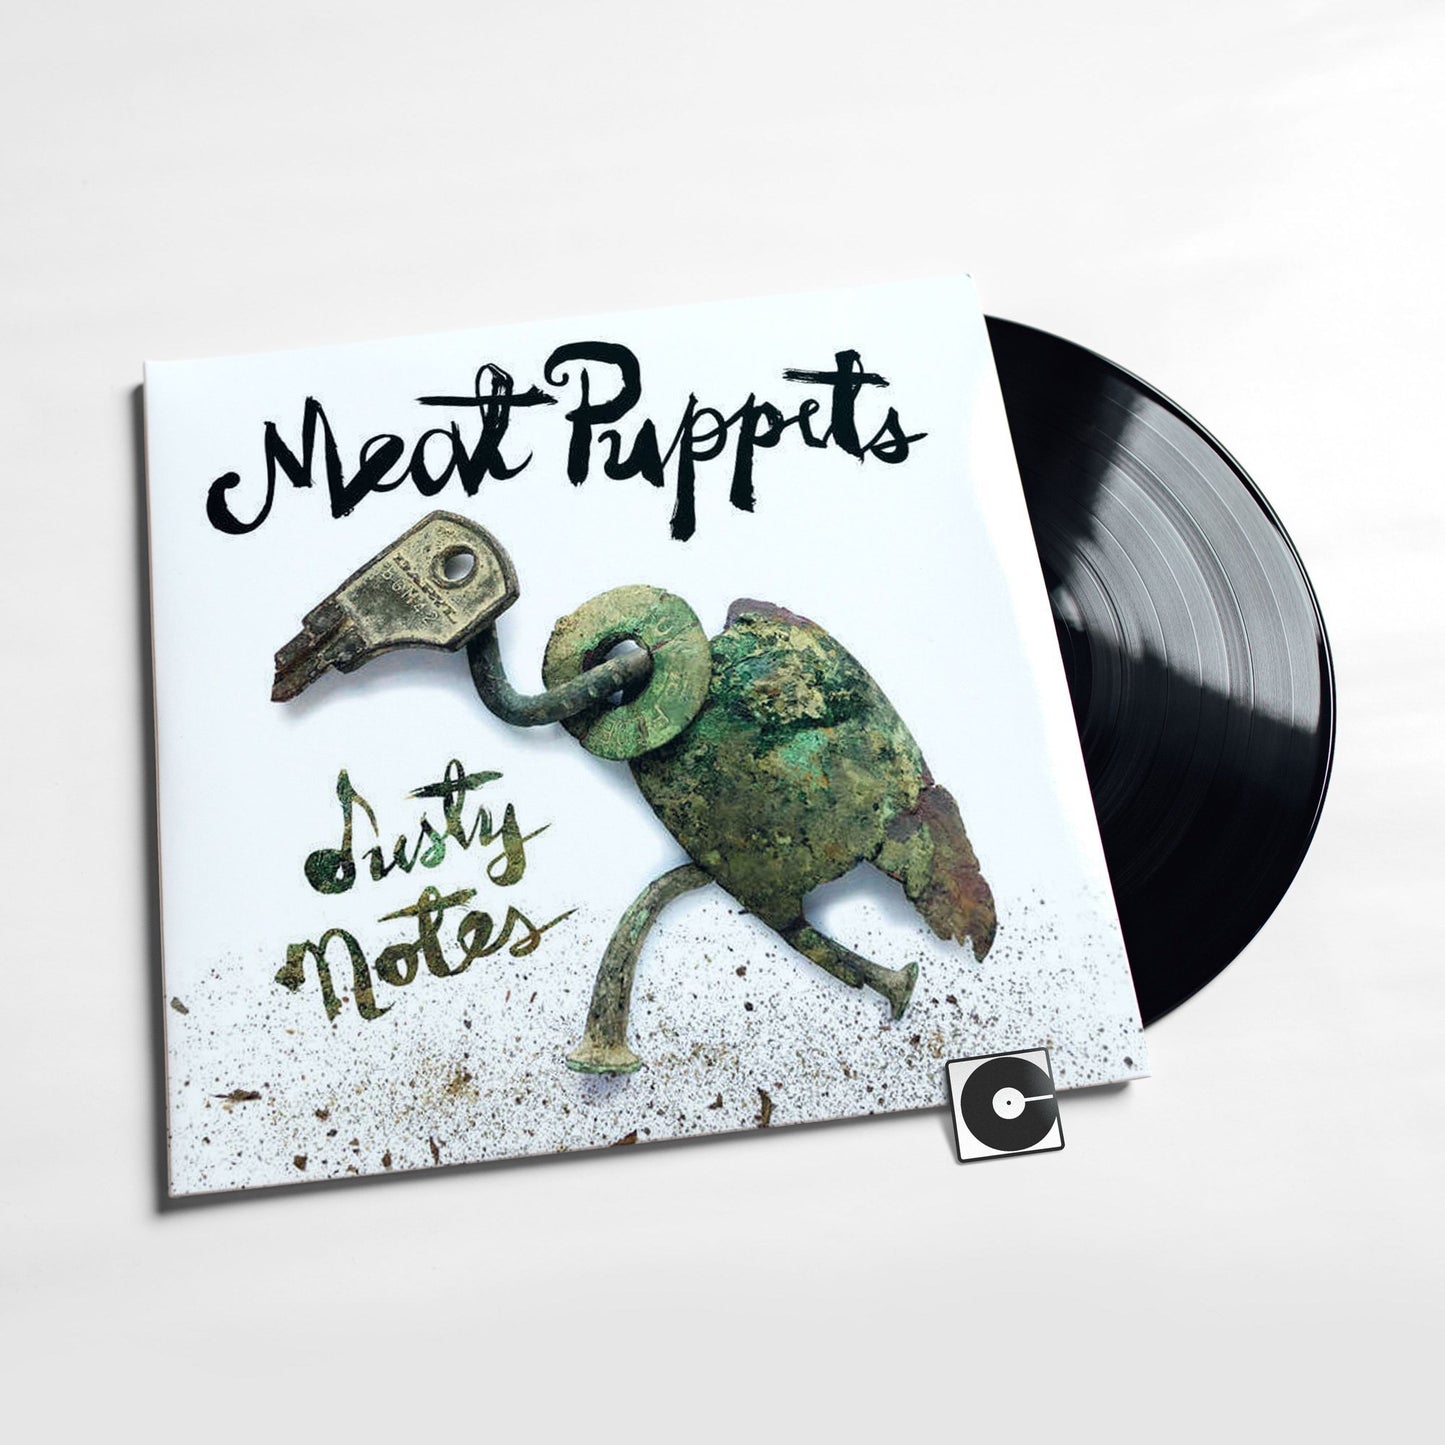 Meat Puppets - "Dusty Notes"